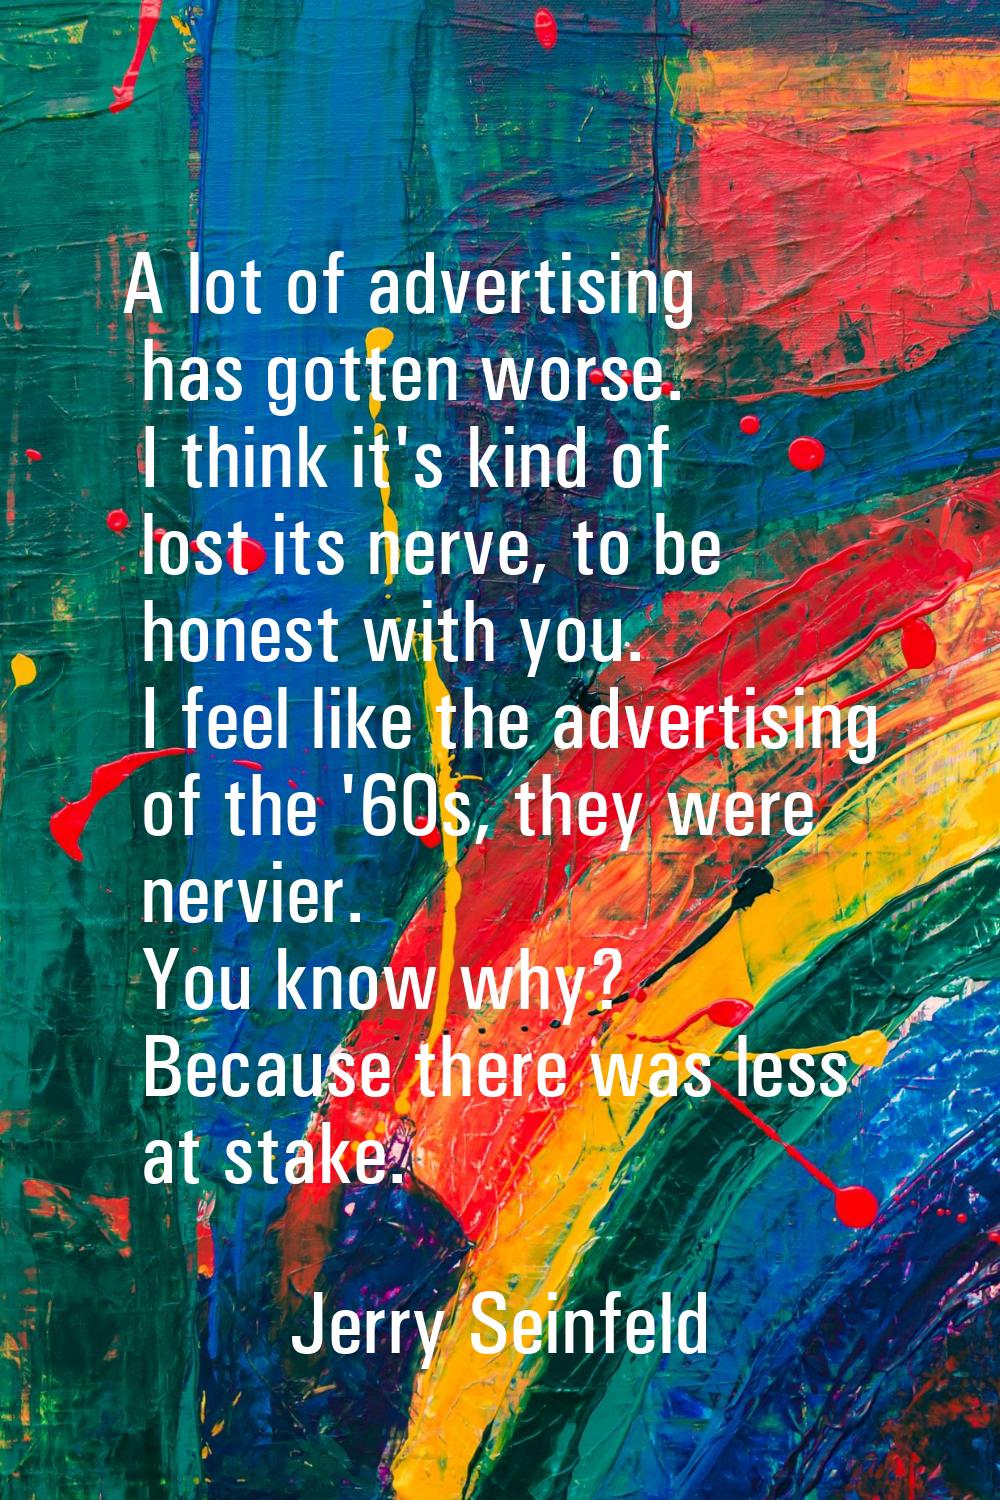 A lot of advertising has gotten worse. I think it's kind of lost its nerve, to be honest with you. 